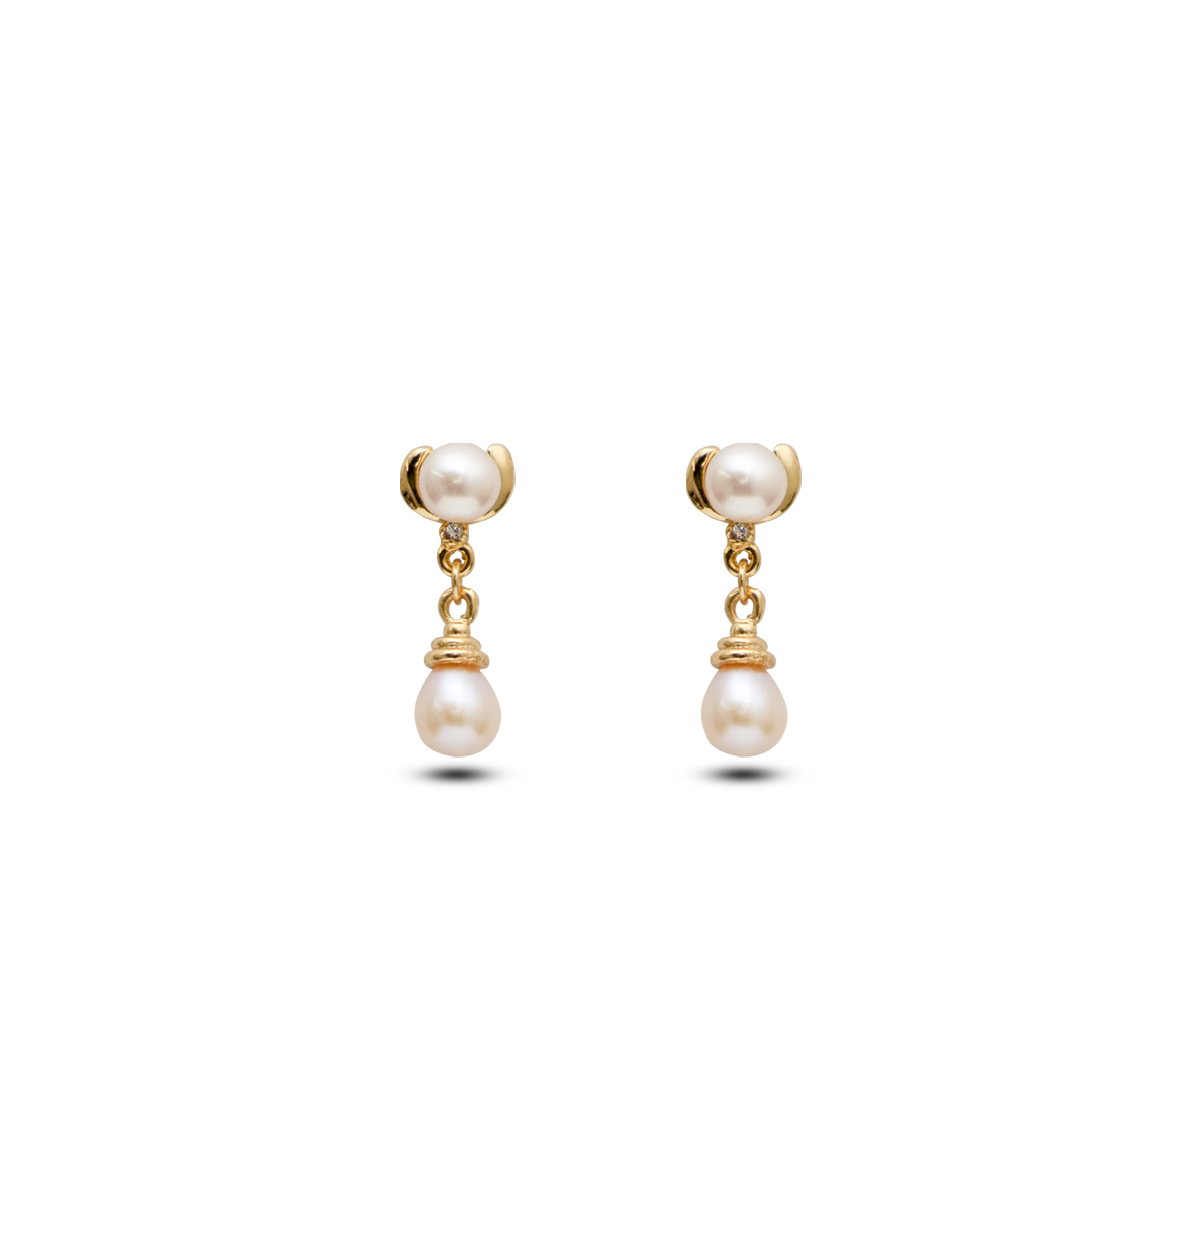 Baroque Pearl Earrings | Unique and British Made | Kiri & Belle